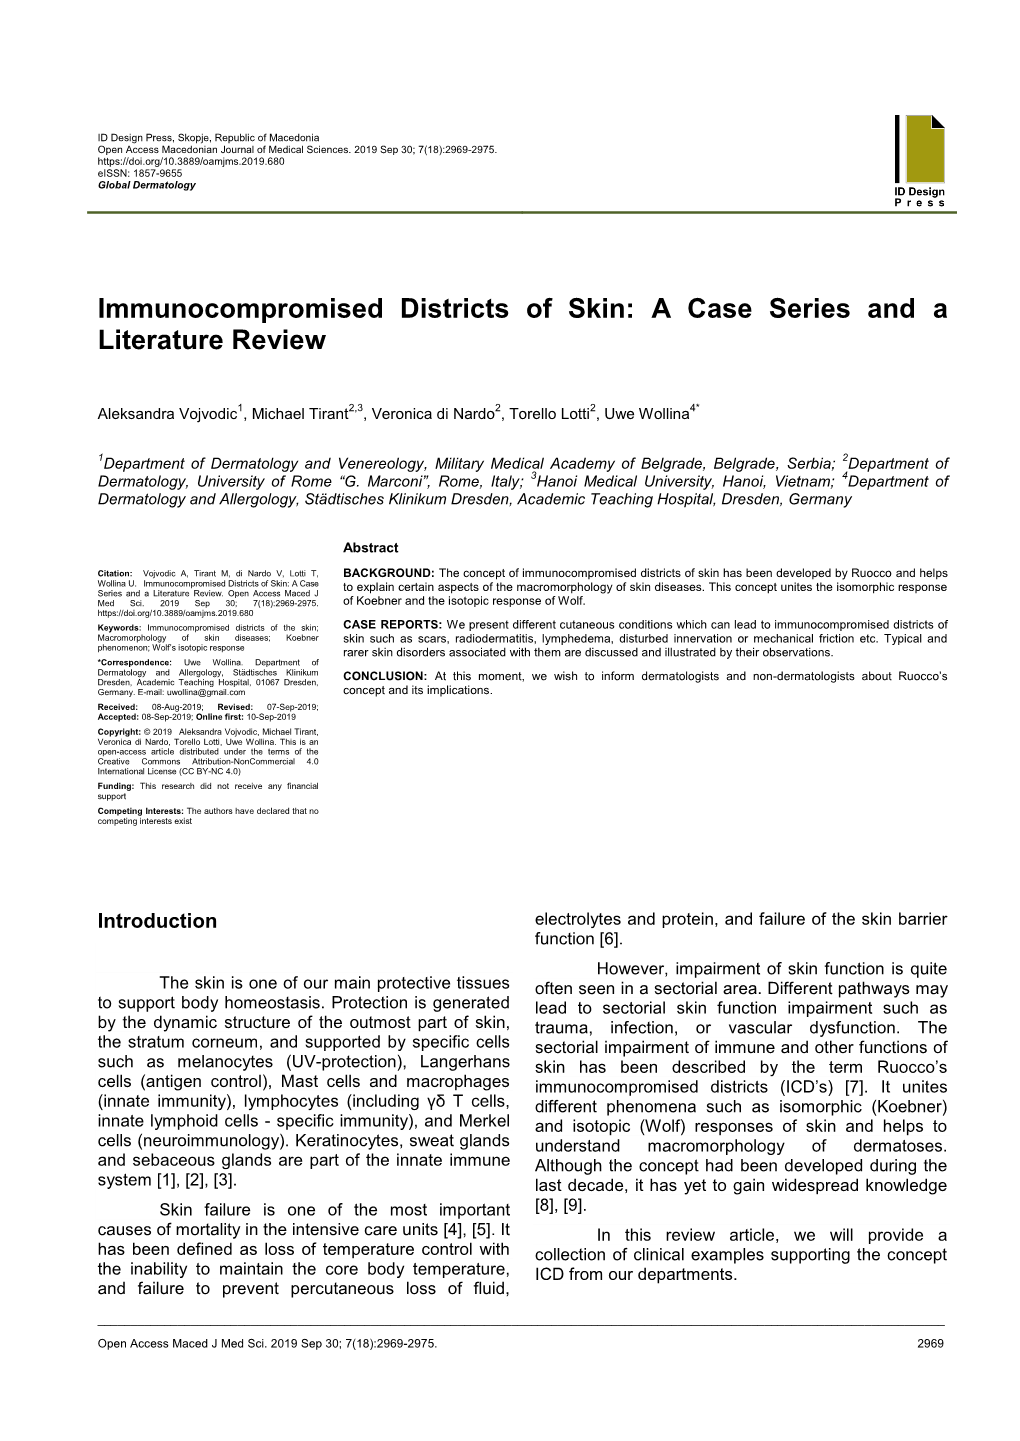 Immunocompromised Districts of Skin: a Case Series and a Literature Review